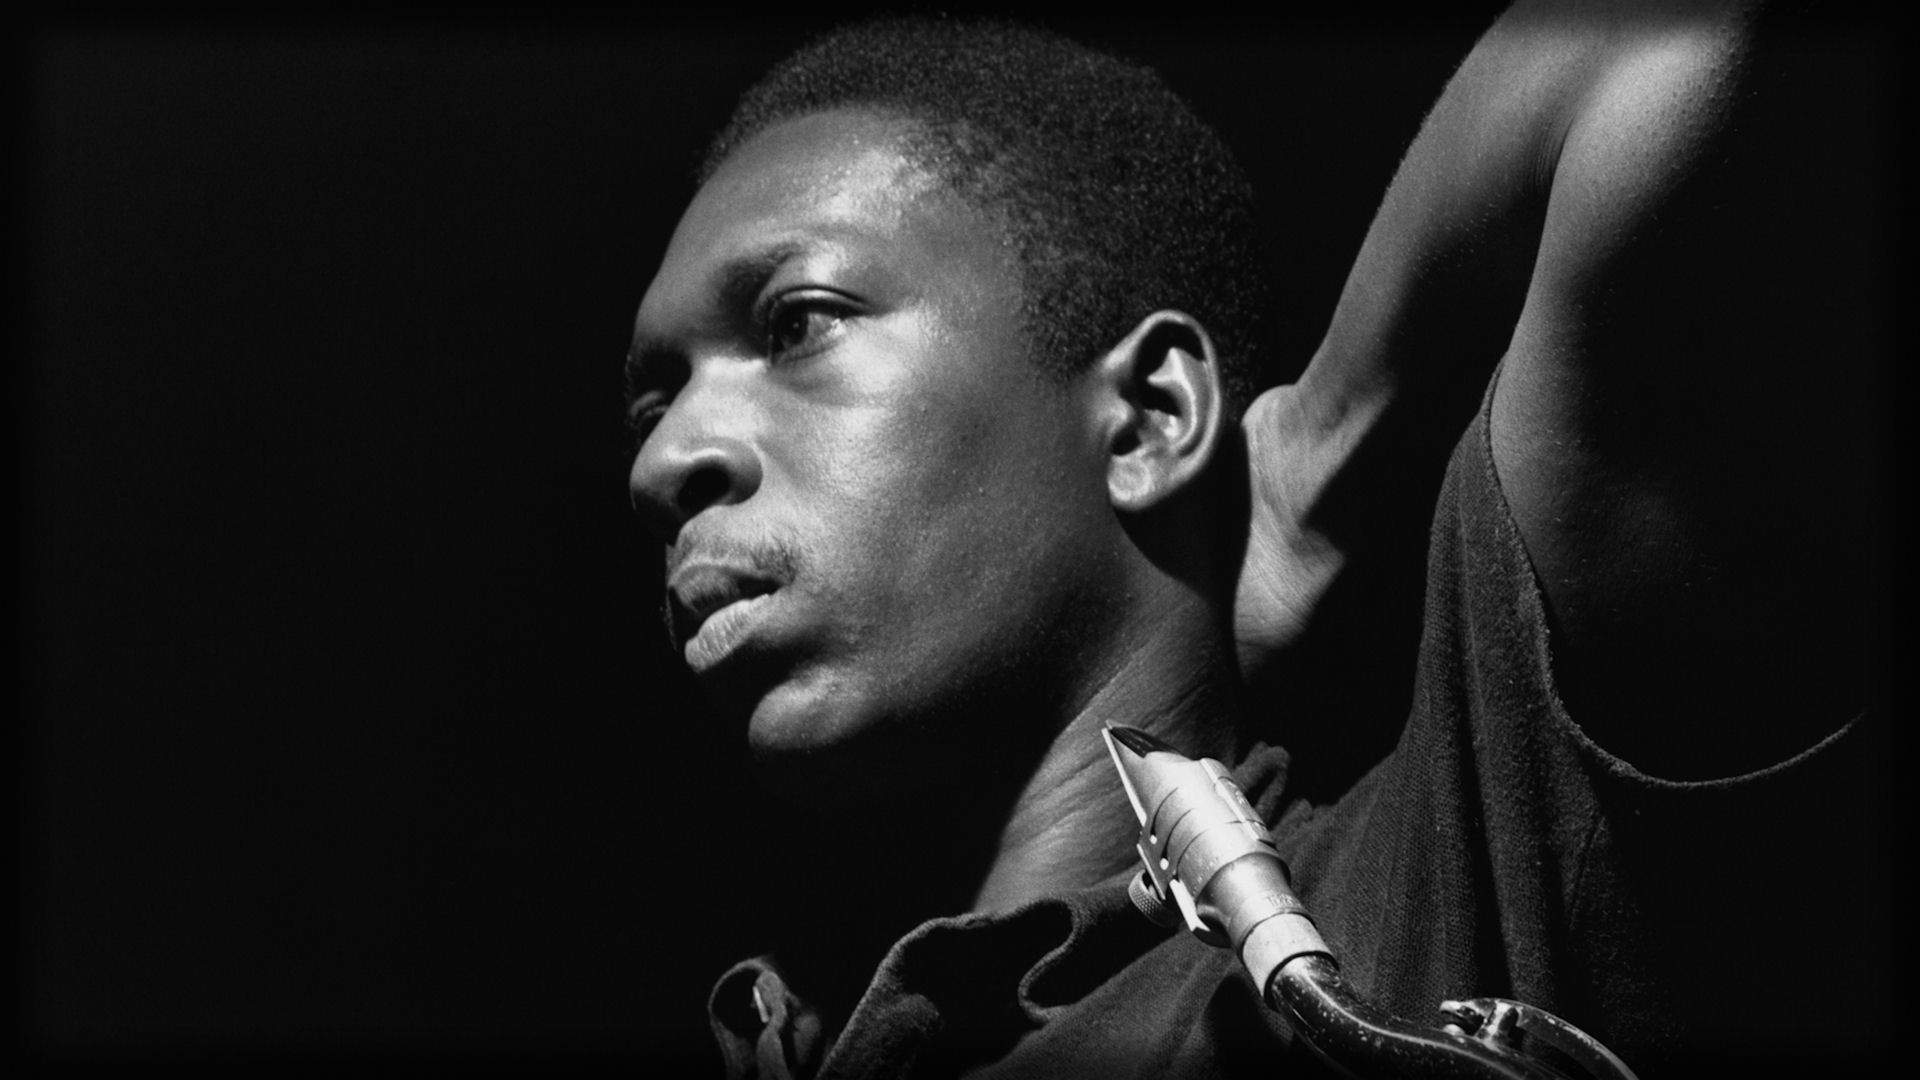 SOLD OUT: A Tribute To John Coltrane with George Caldwell Quartet and Vincent Herring